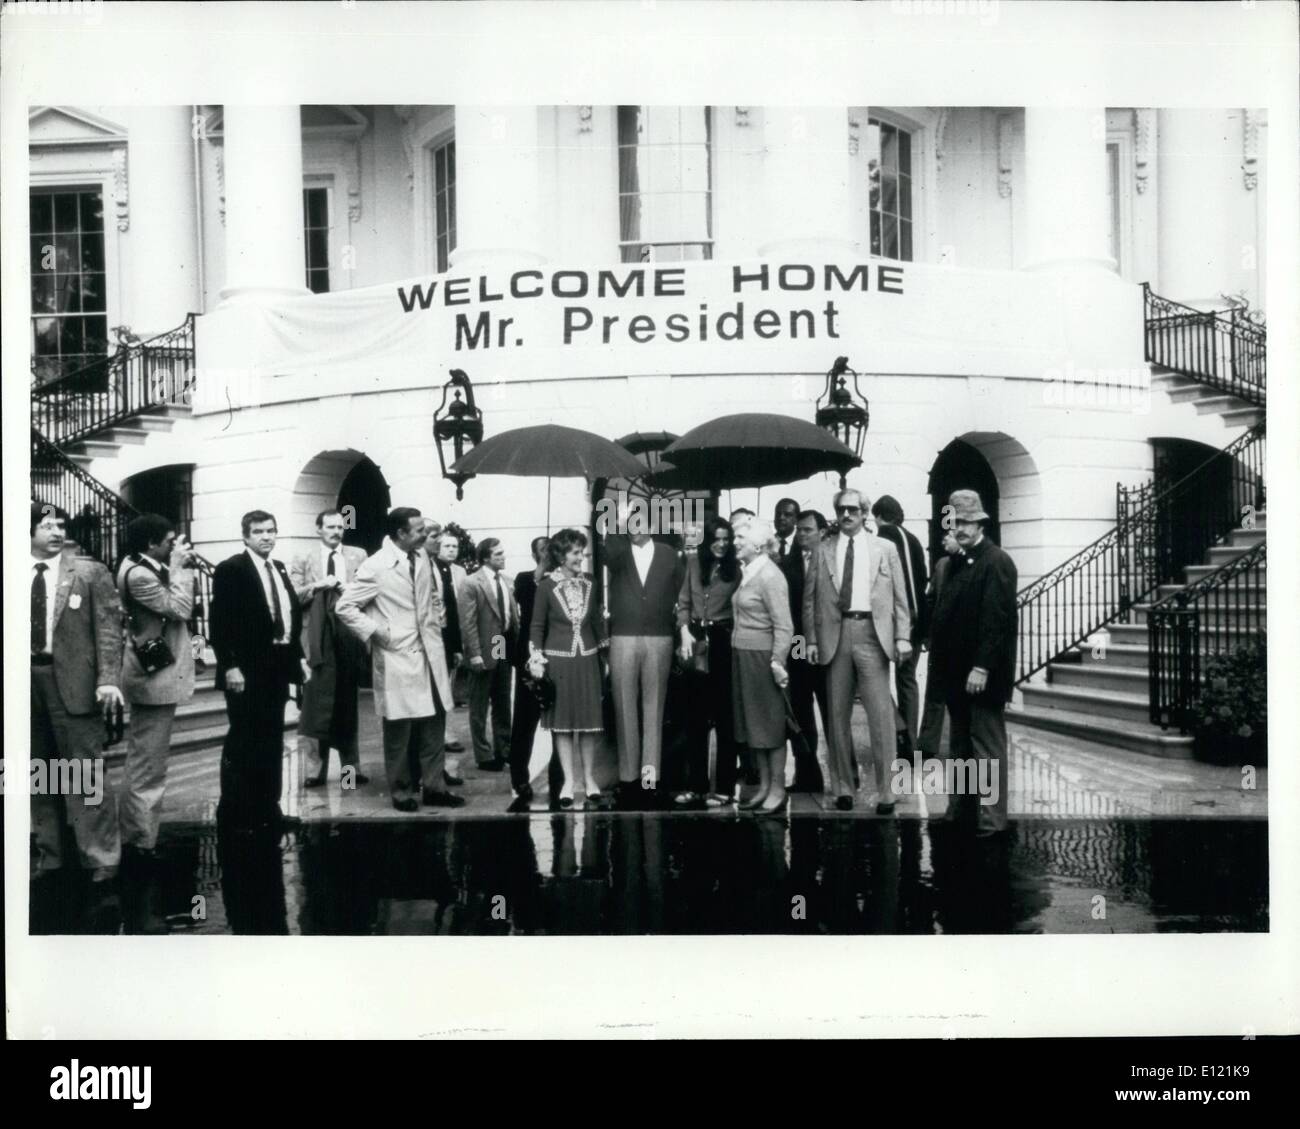 Nov. 11, 1981 - Consolidated news pictures : Reagan arrives at white house. Washington President and Mrs. Ronald Reagan arrive at the white house from Georgetown hospital where the chief executive was recuperating from his gunshot would as he was leavening a Washington, D.c. hotel. Also shows under the ''welcome Home Mr. President'' sign is Vice president and Mrs. George Bush. white house photo from consolidated. Stock Photo